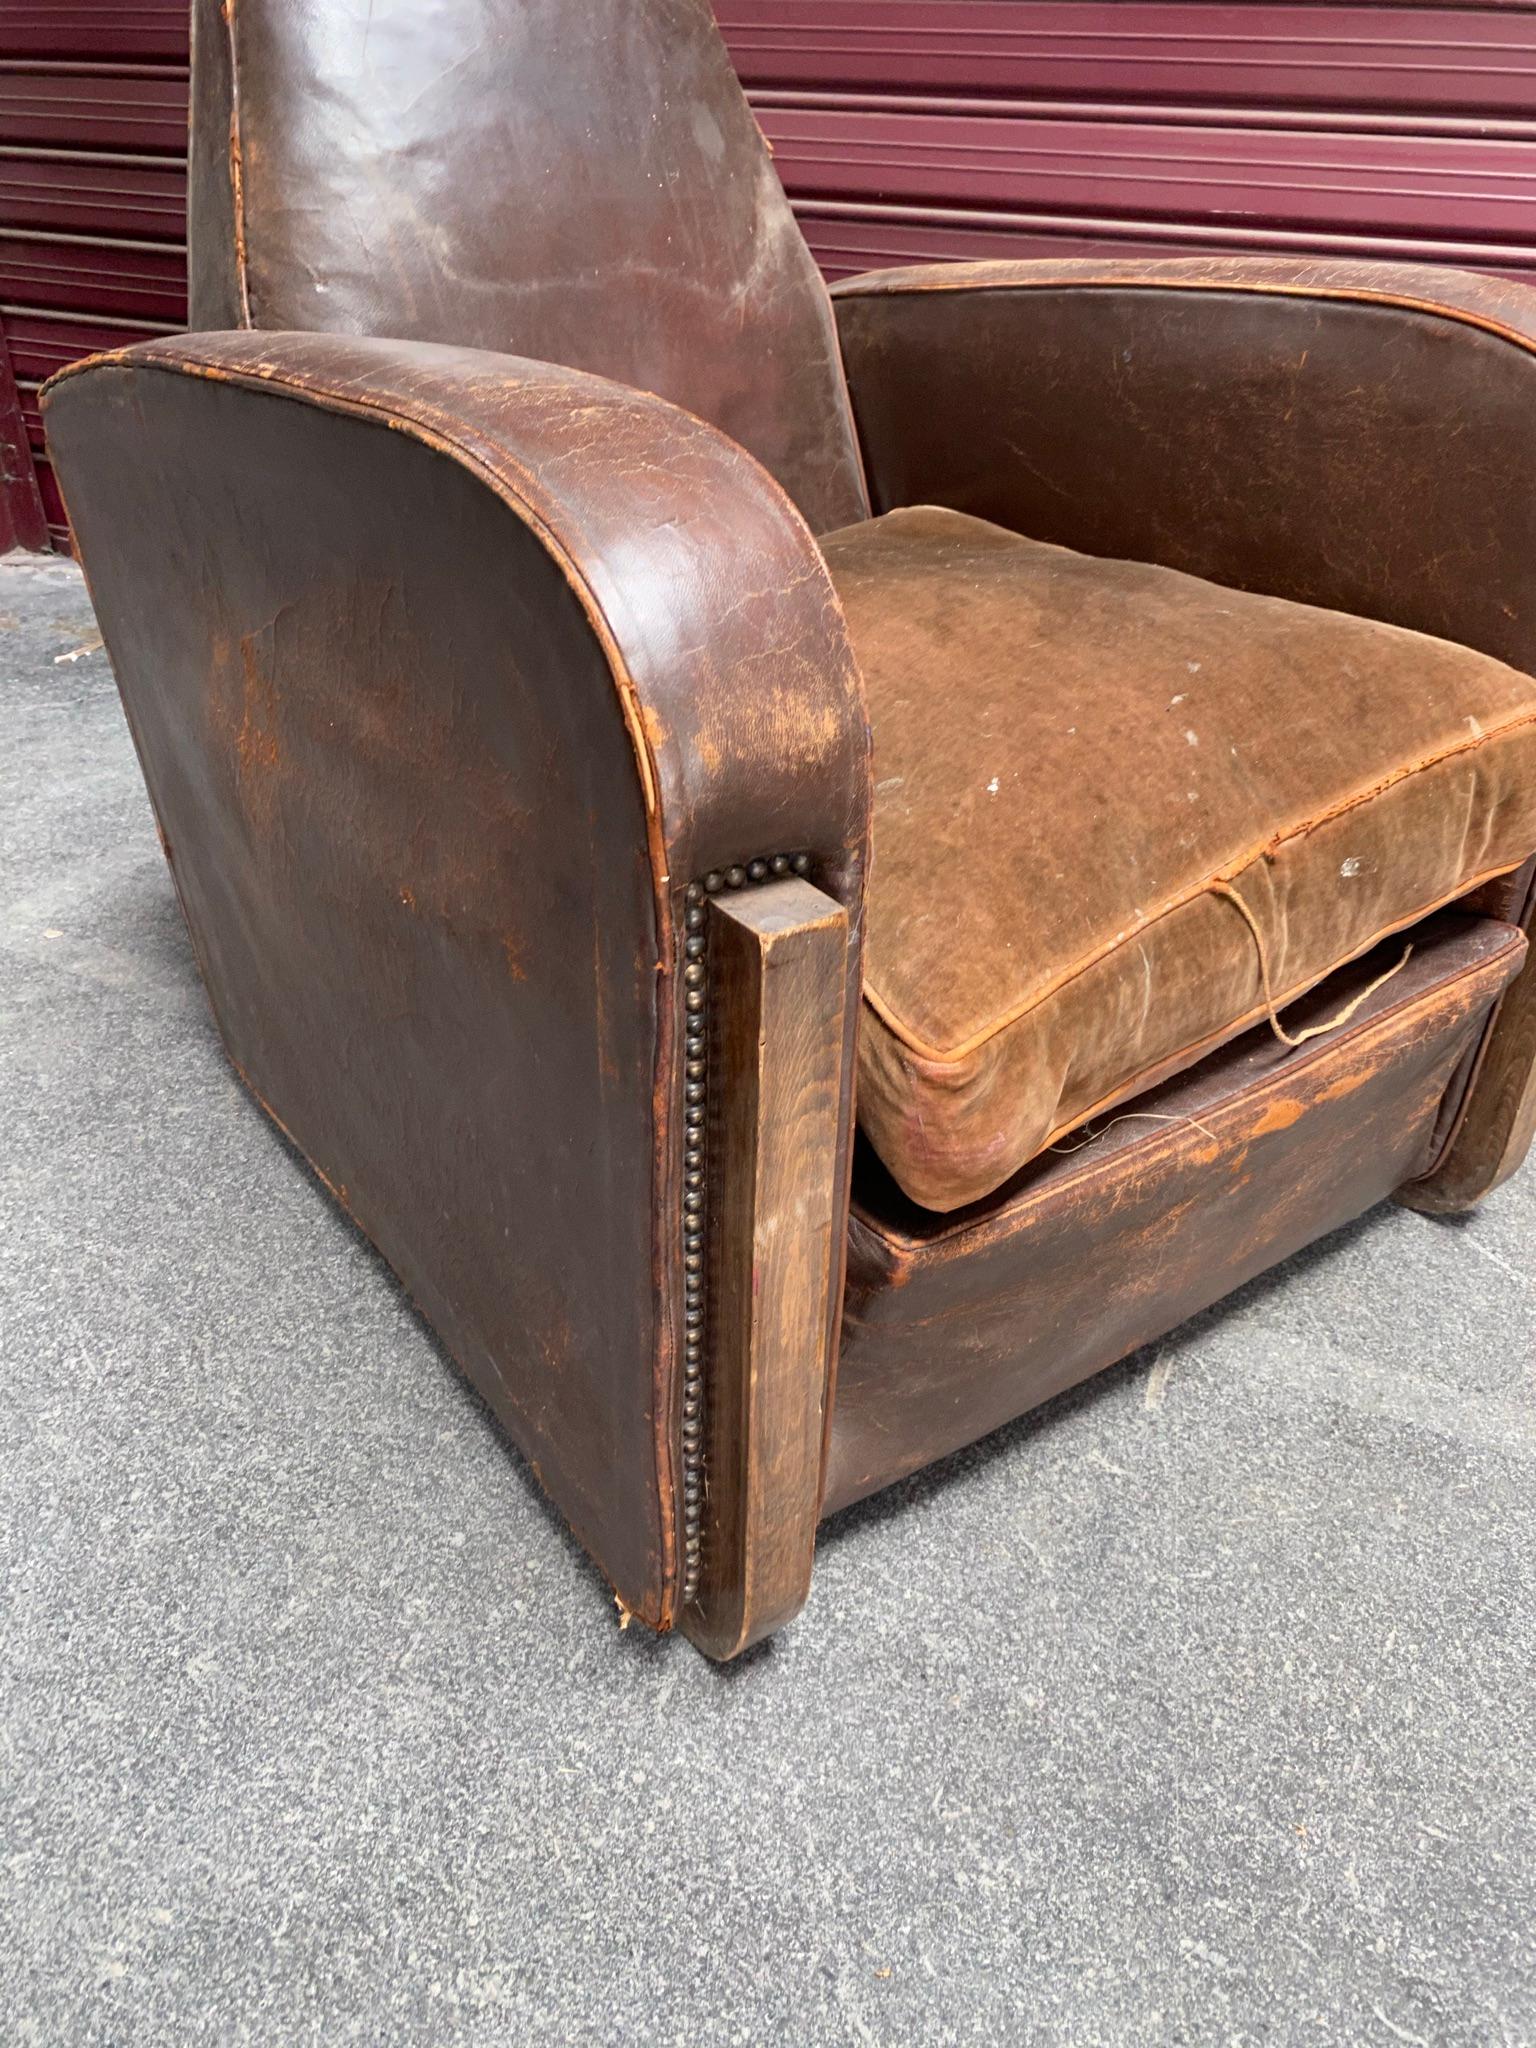 Two Large Elegant Art Deco Armchairs Covered in Leather, Sled Base, circa 1930 For Sale 1